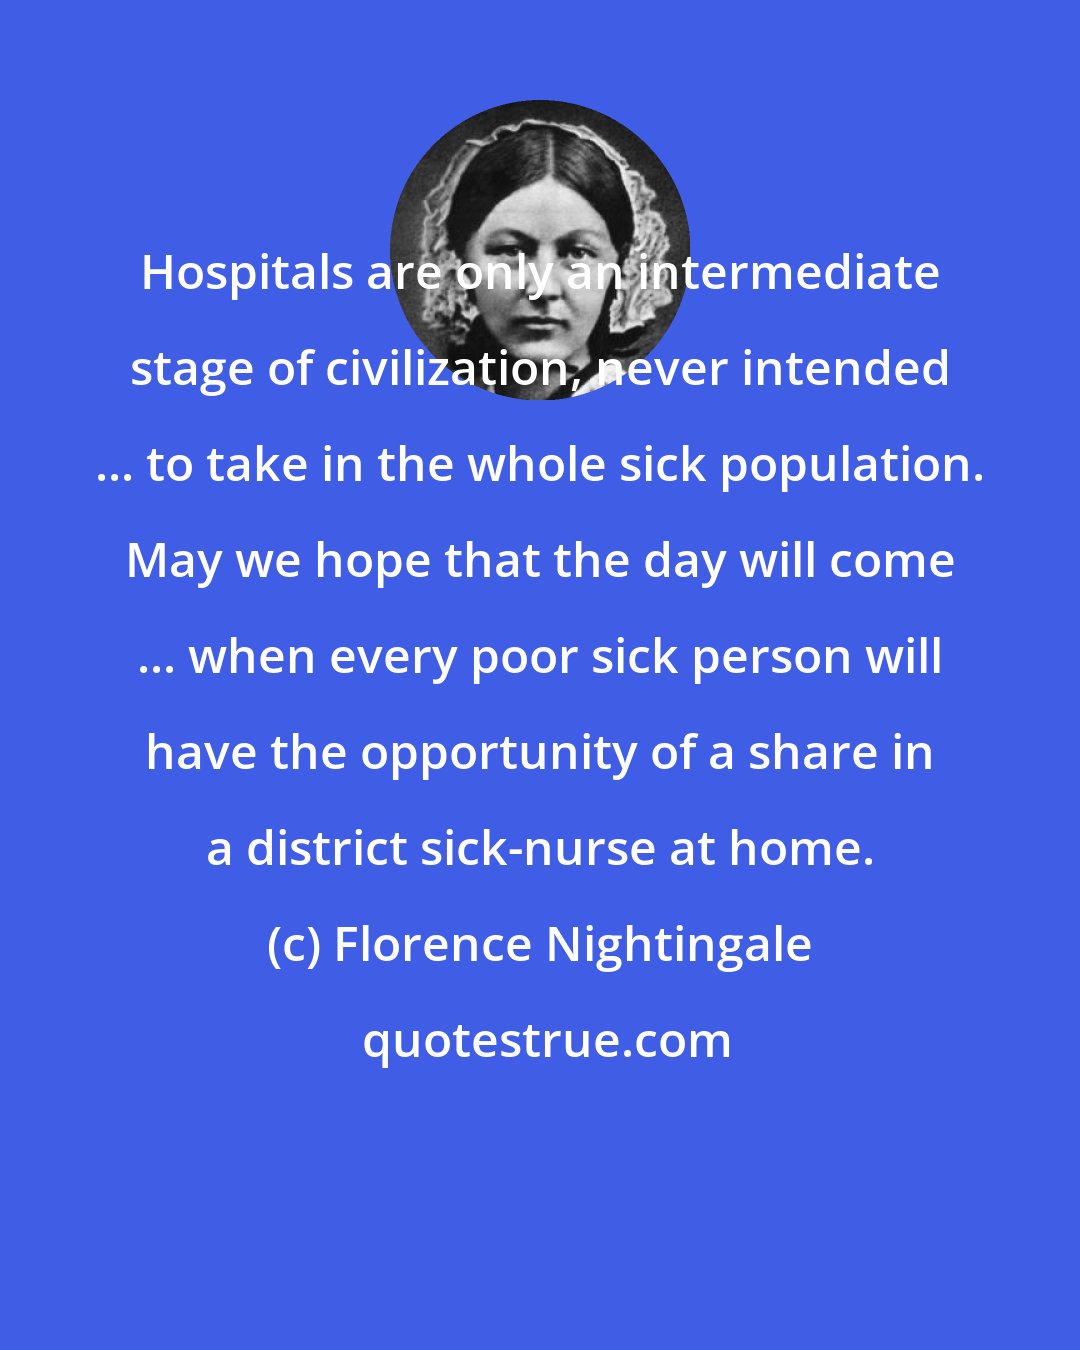 Florence Nightingale: Hospitals are only an intermediate stage of civilization, never intended ... to take in the whole sick population. May we hope that the day will come ... when every poor sick person will have the opportunity of a share in a district sick-nurse at home.